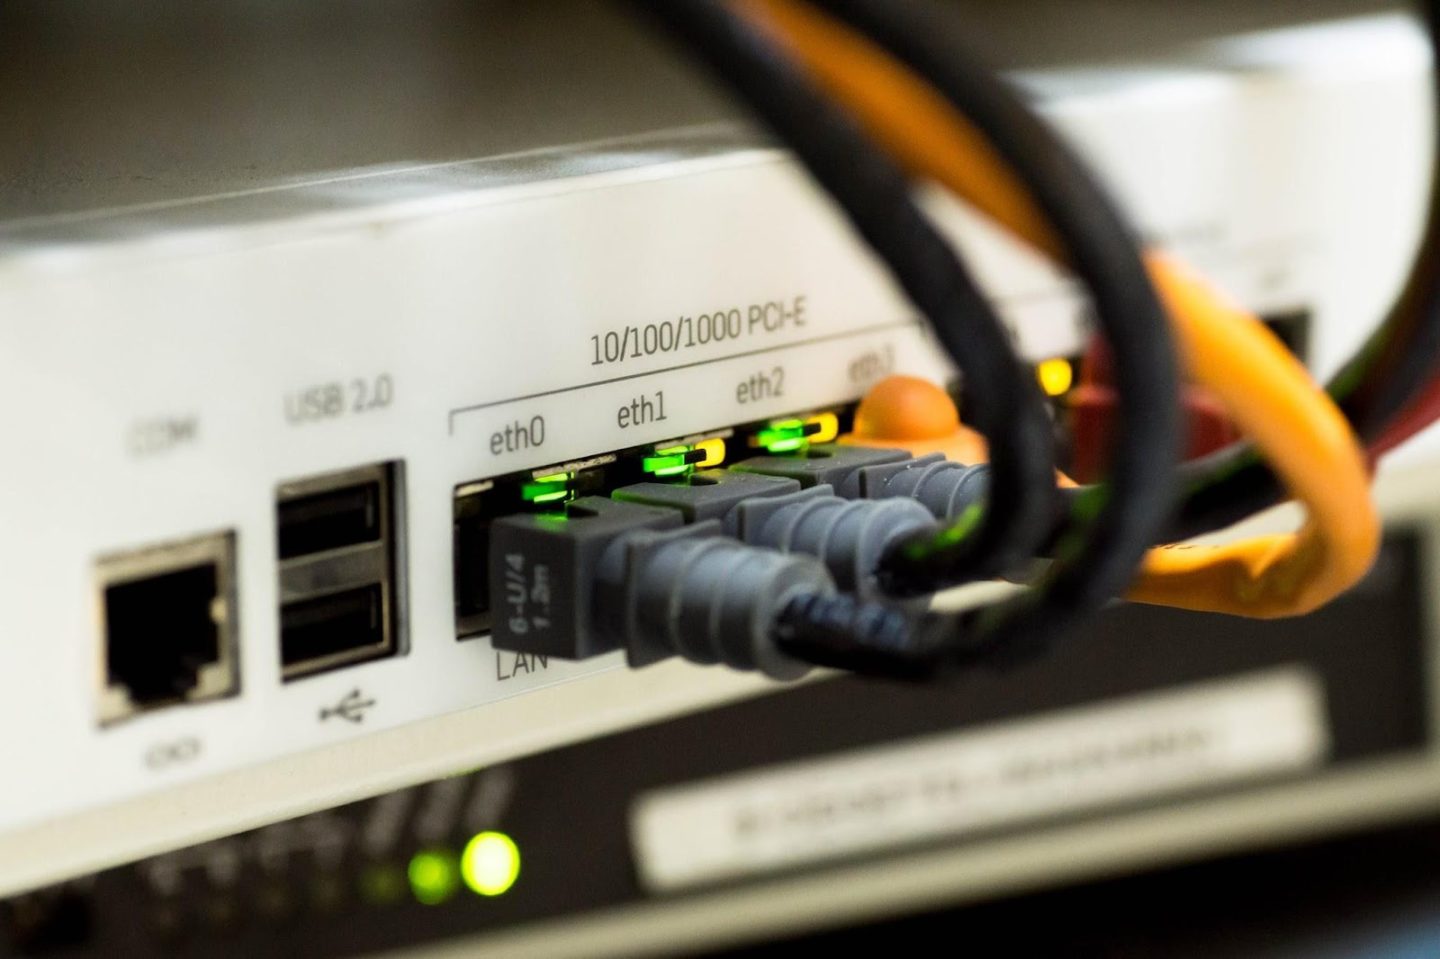 The Most Effective Ways To Protect Your Home Network